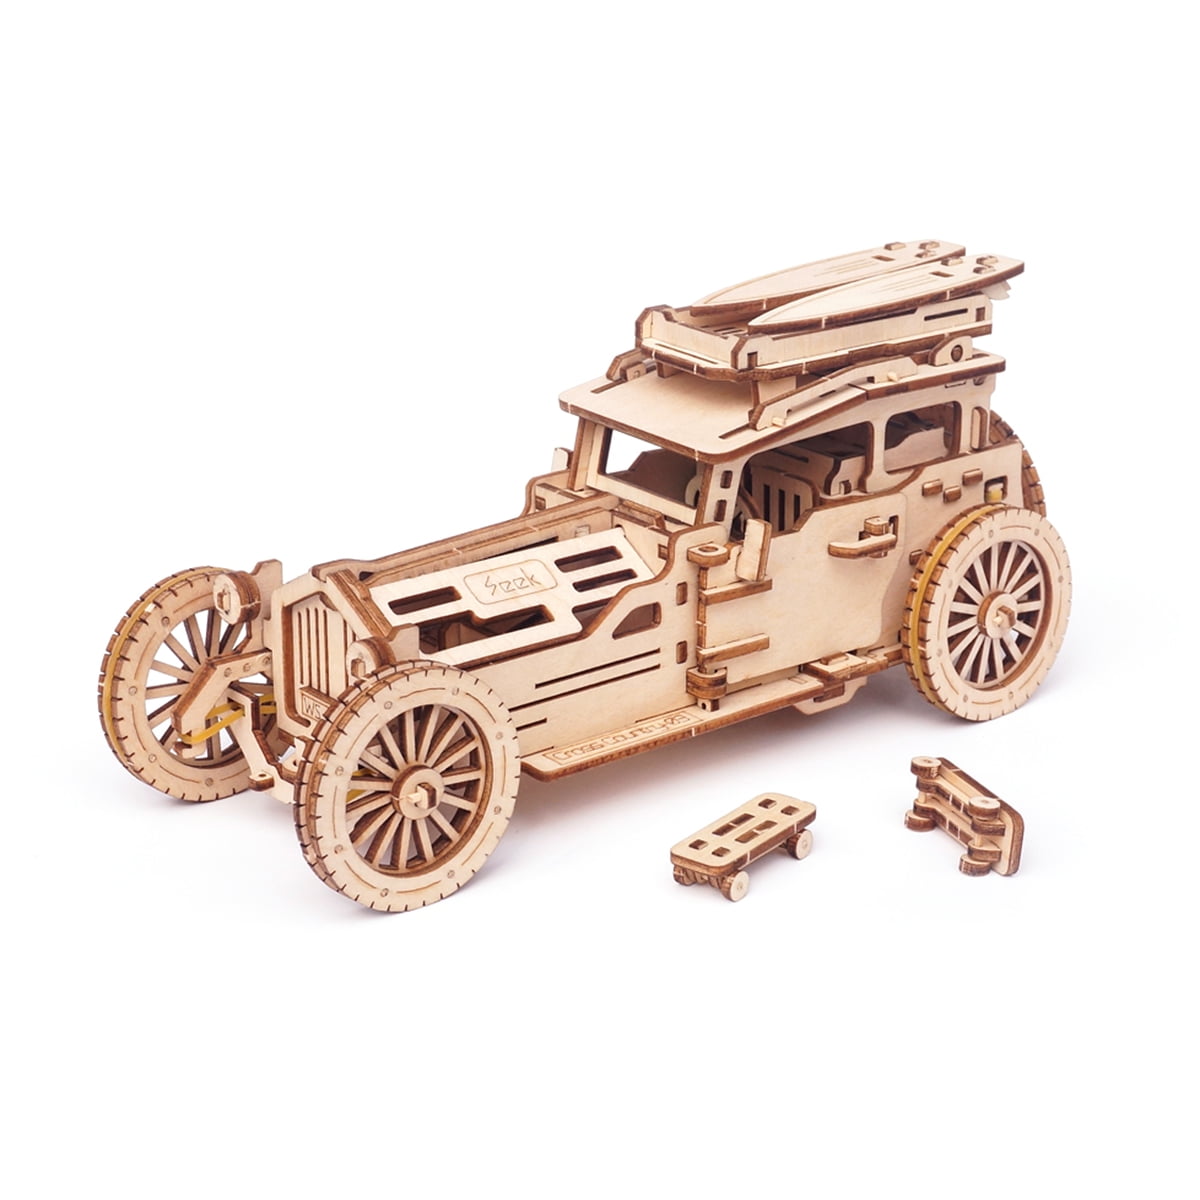 Vintage Car Collectibles Wooden Model Kits for Adults Desk Toys Display Gift for Boys/Girls Rolife 3D Wooden Puzzles Retro Car Model 